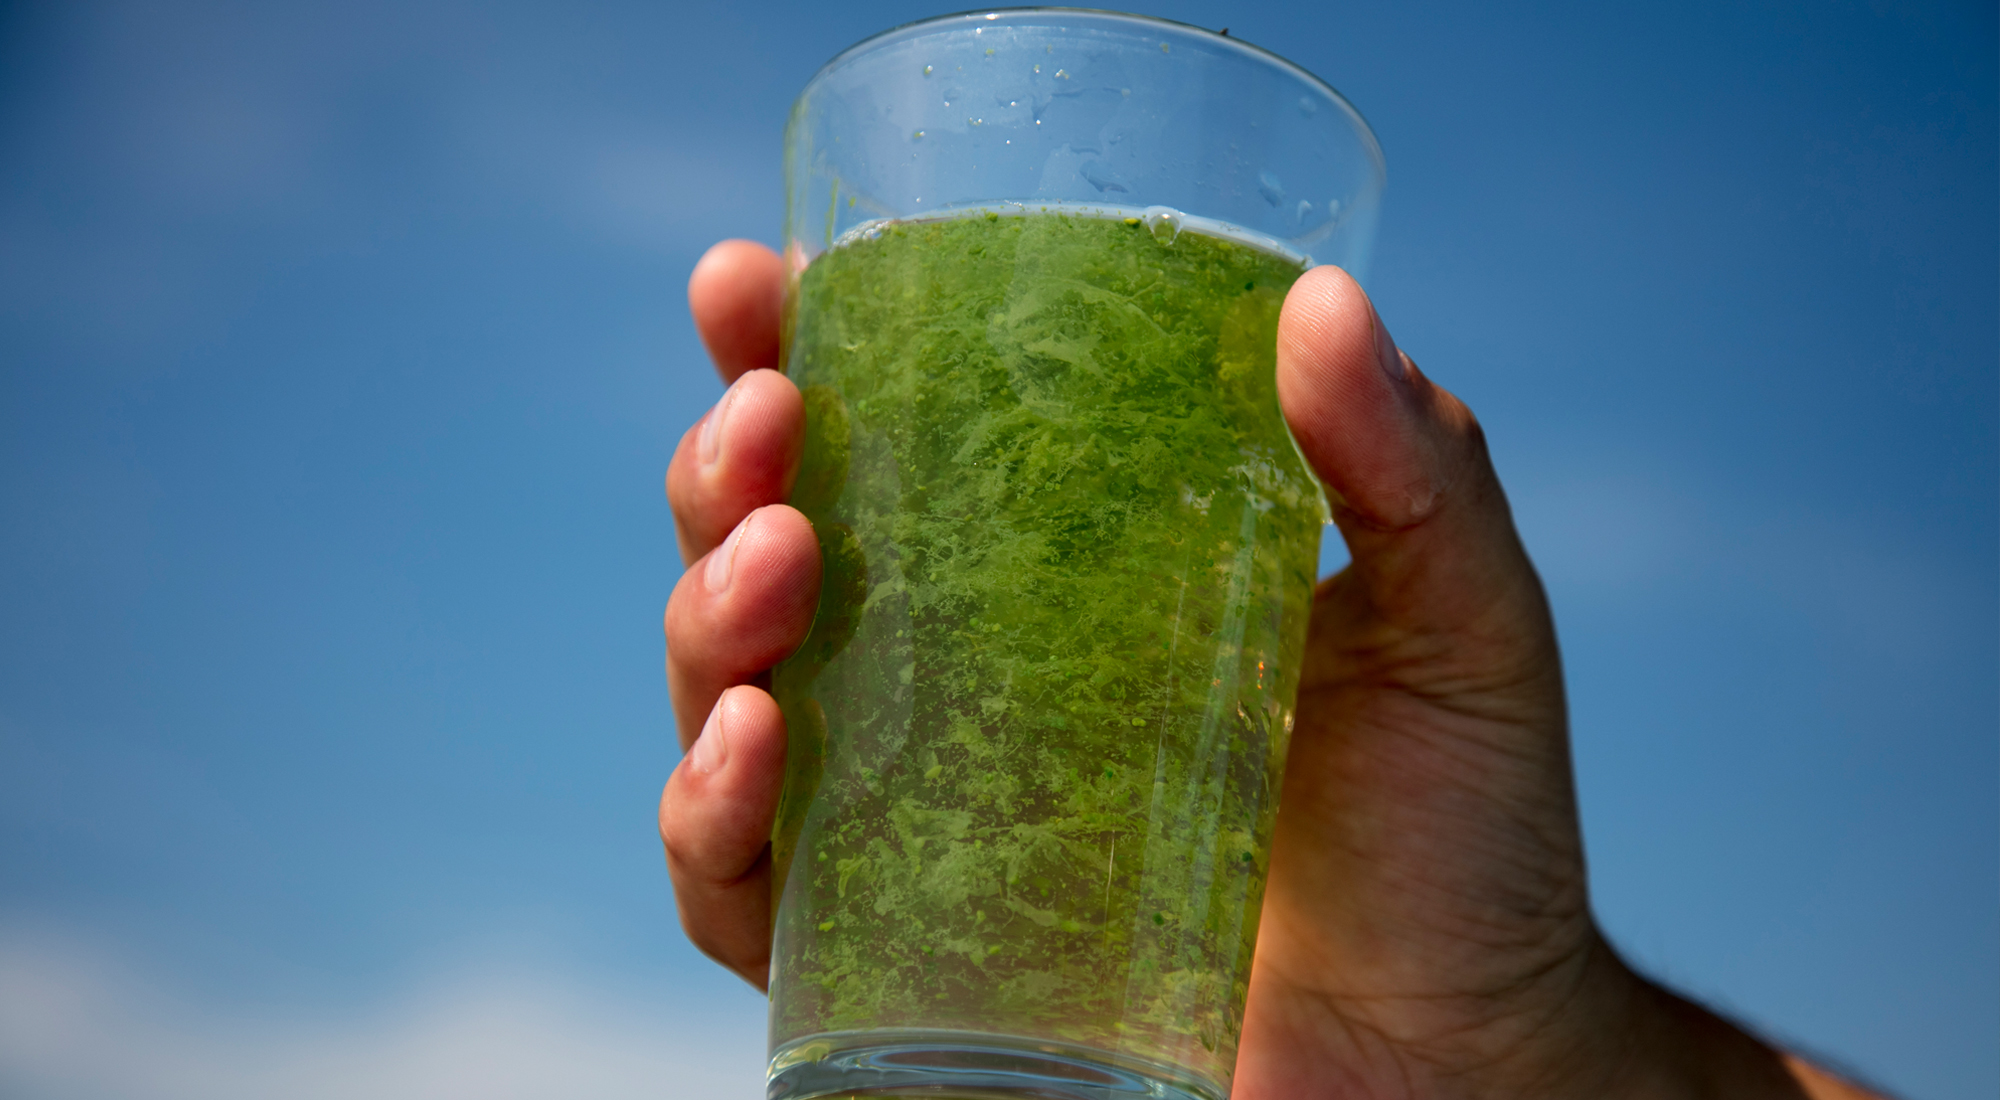 Hand holds up glass of water fille with algae.